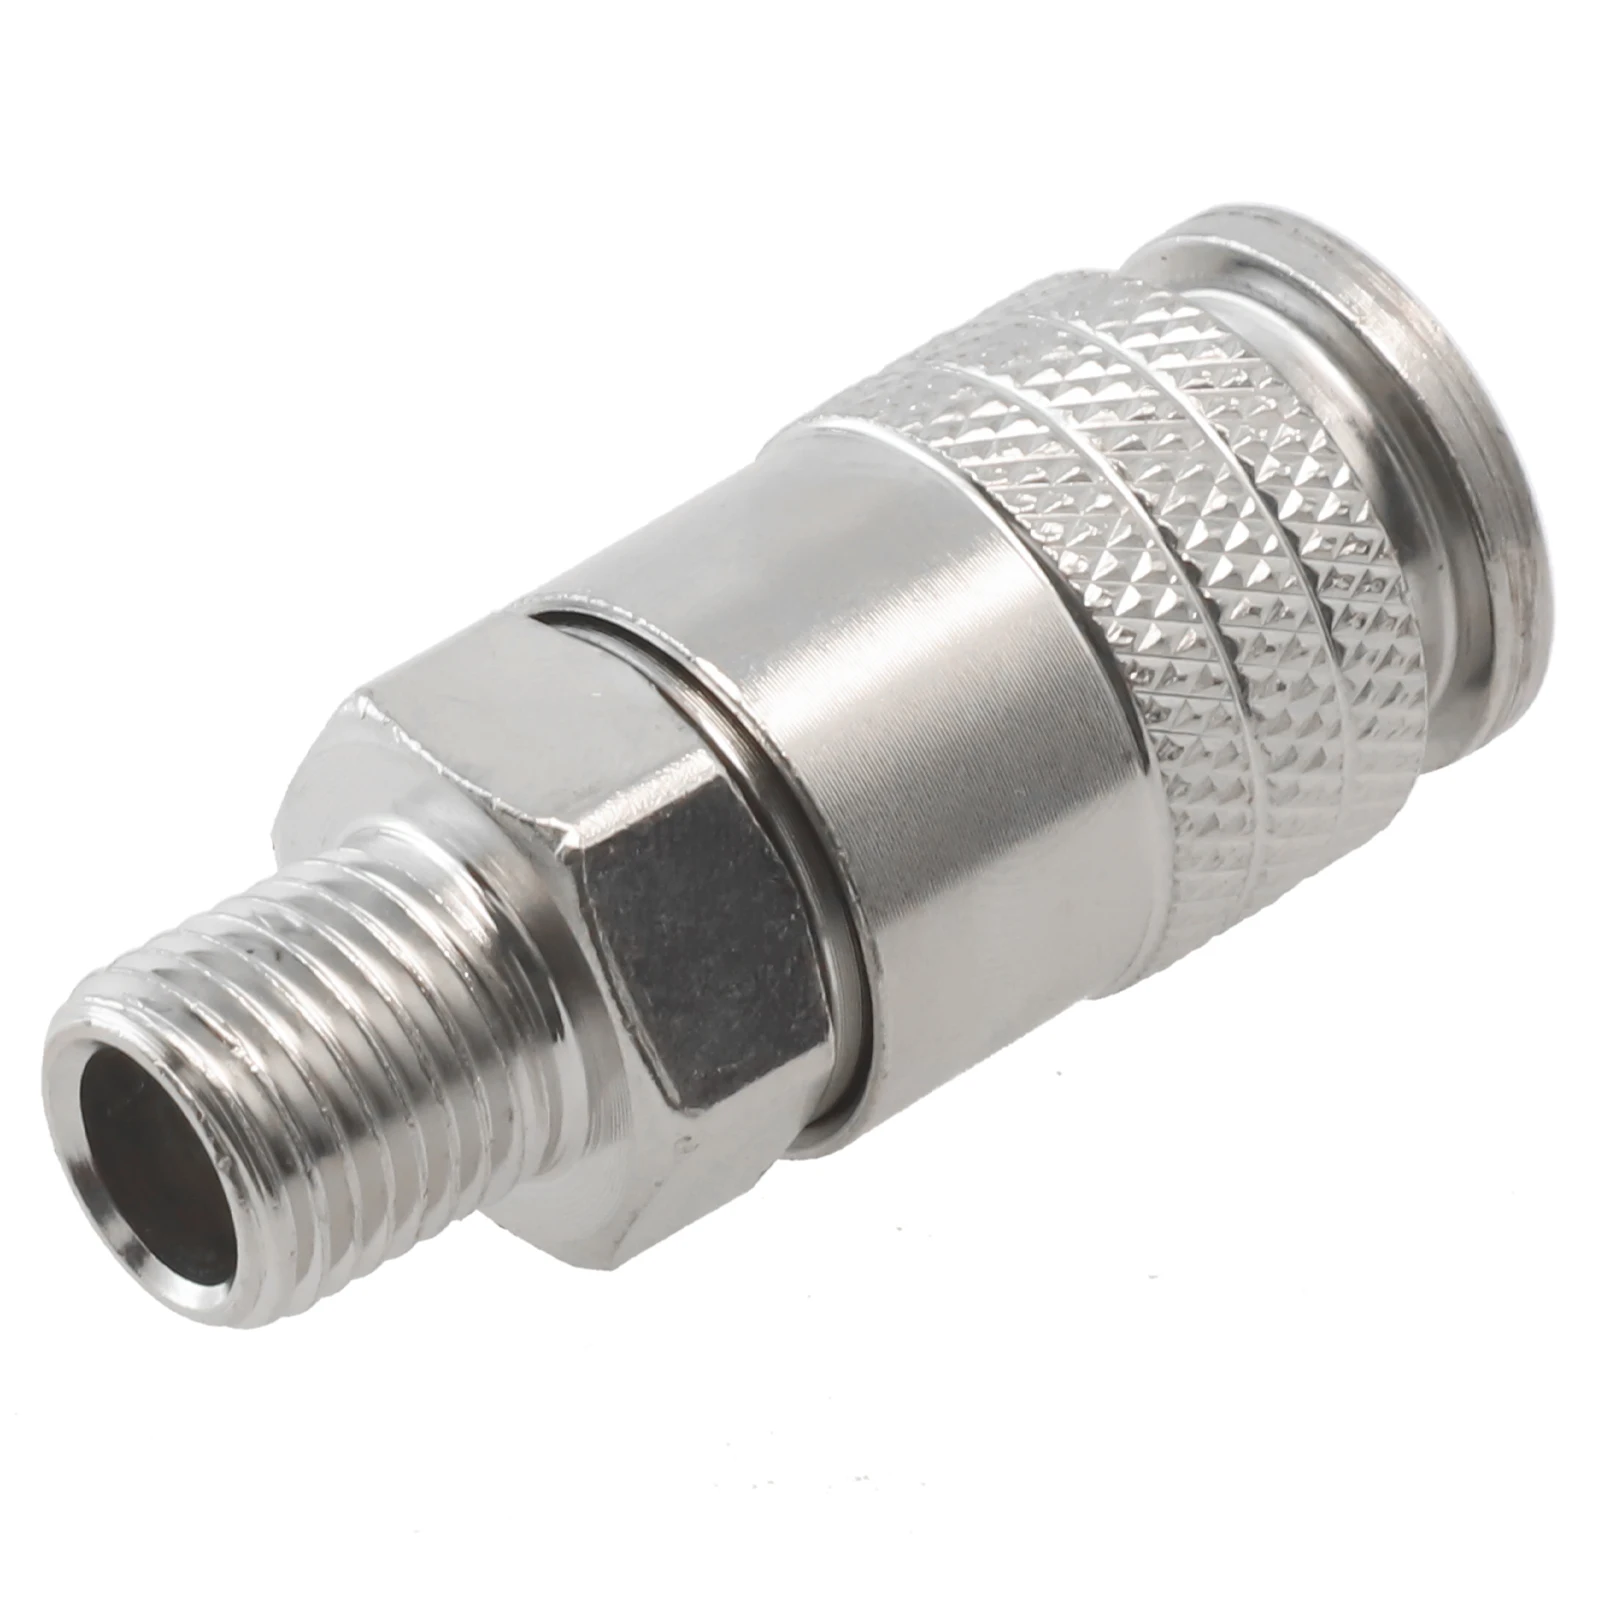 Pneumatic Fitting G1/4 Male Thread EU Standard Quick Connector For Air Compressor 53mm Length Air Compressor Tool Parts 5 9ft nylon braided airbrush hose airbrush accessory connect to air compressor quick connector leak proof bspt threaded